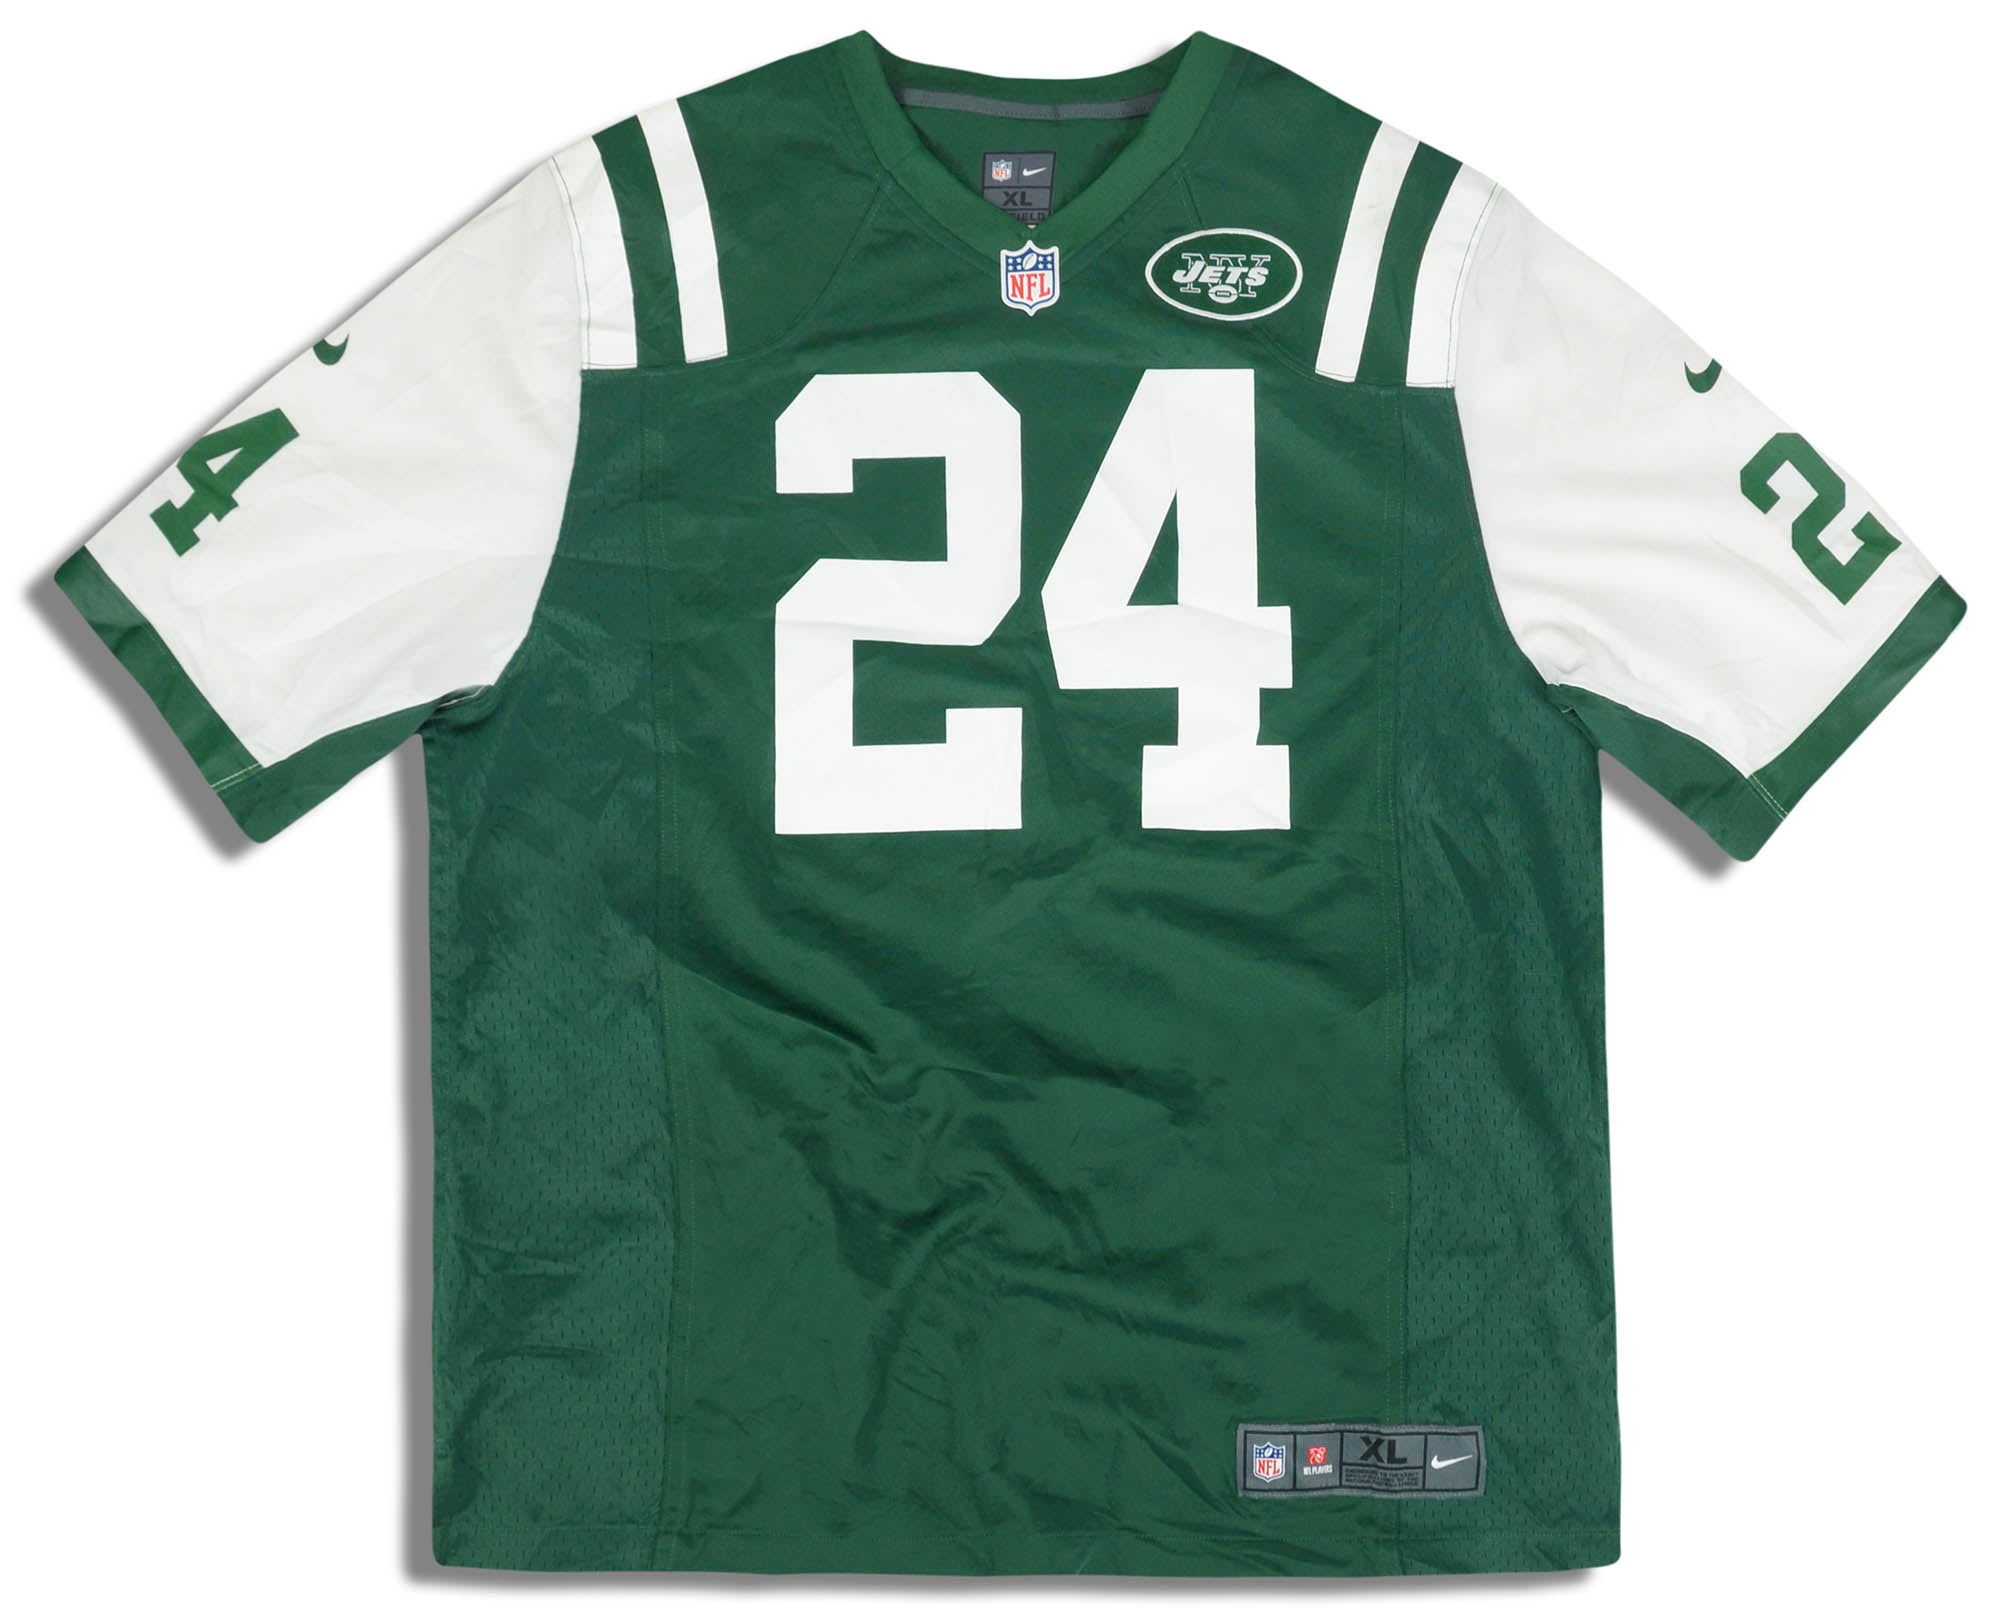 2012 NEW YORK JETS REVIS #24 NIKE GAME JERSEY (HOME) XL